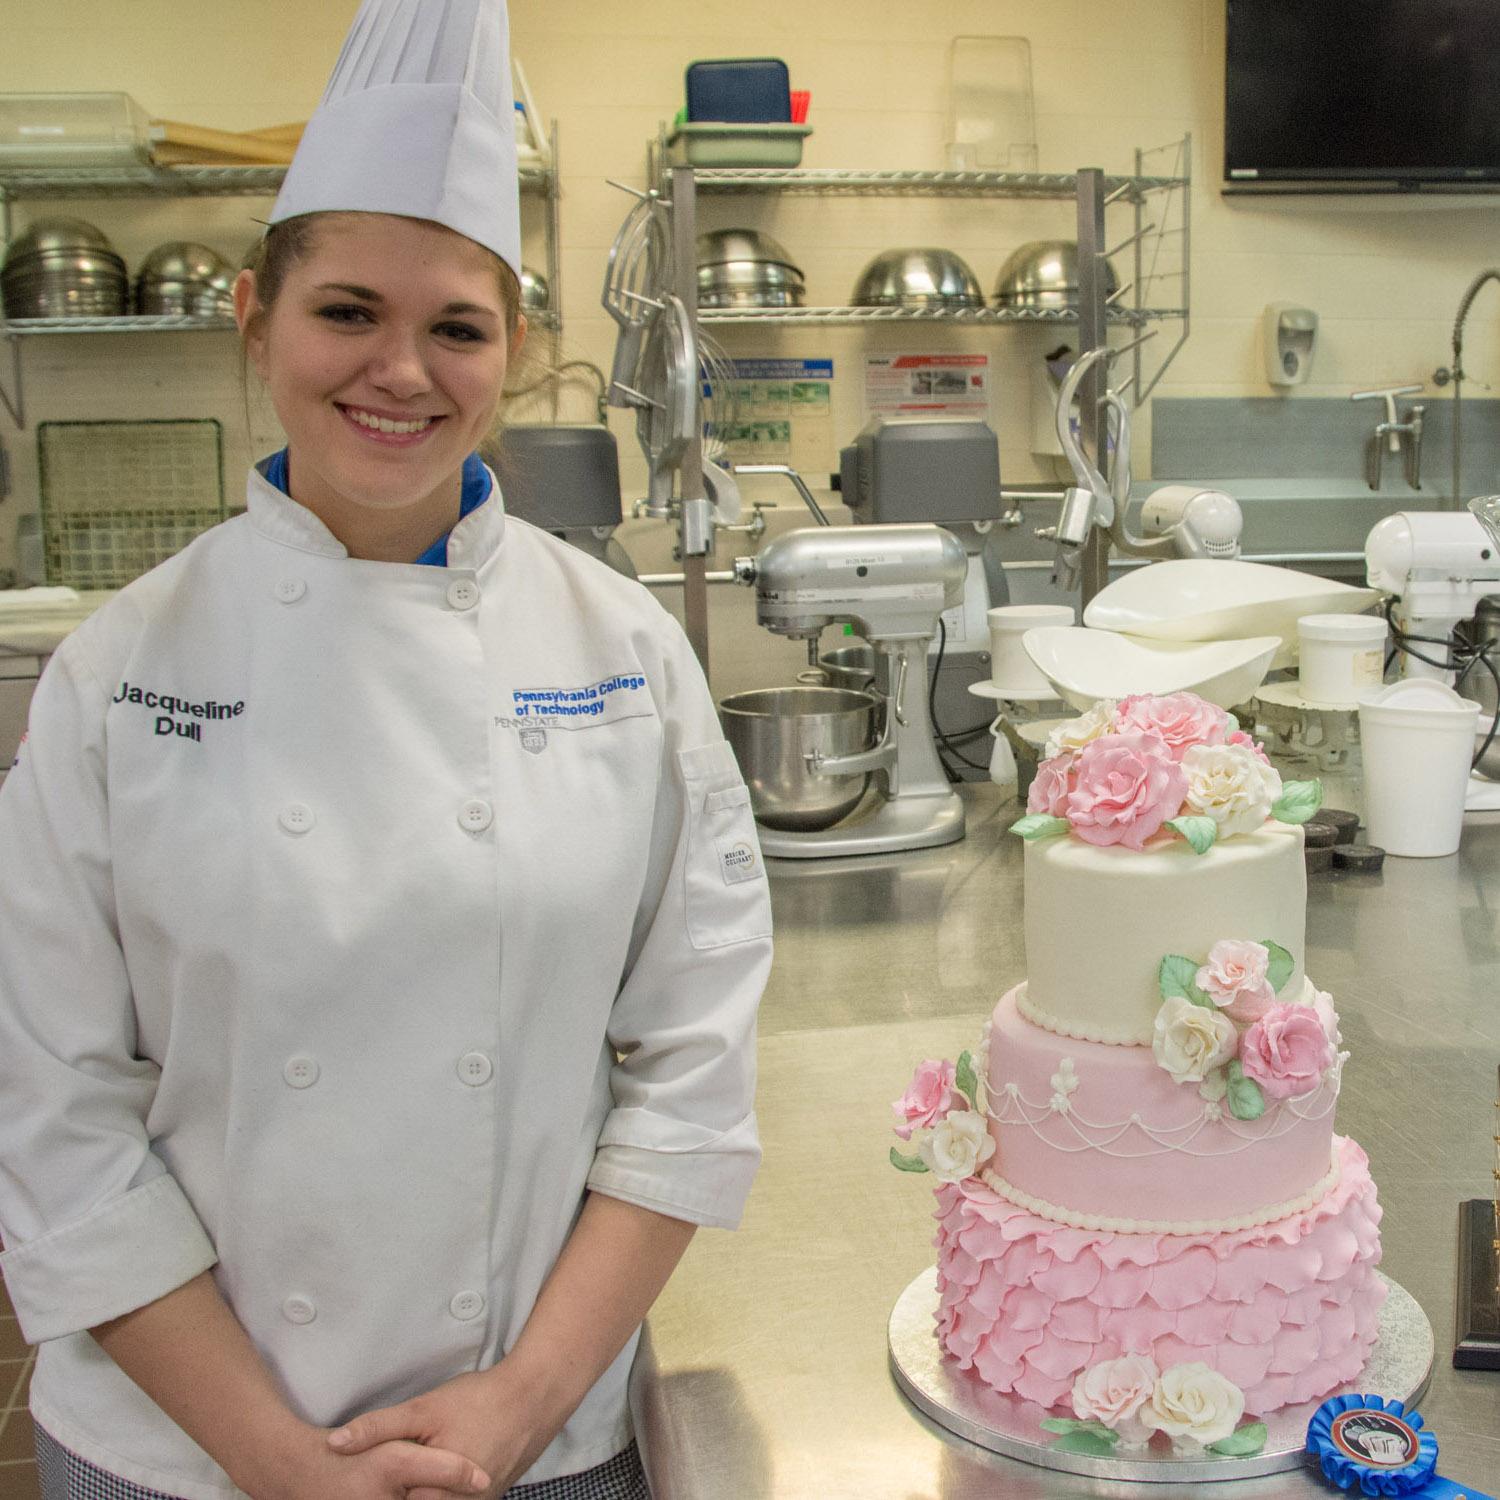 Professional Baking | Certificate | Pennsylvania College of Technology